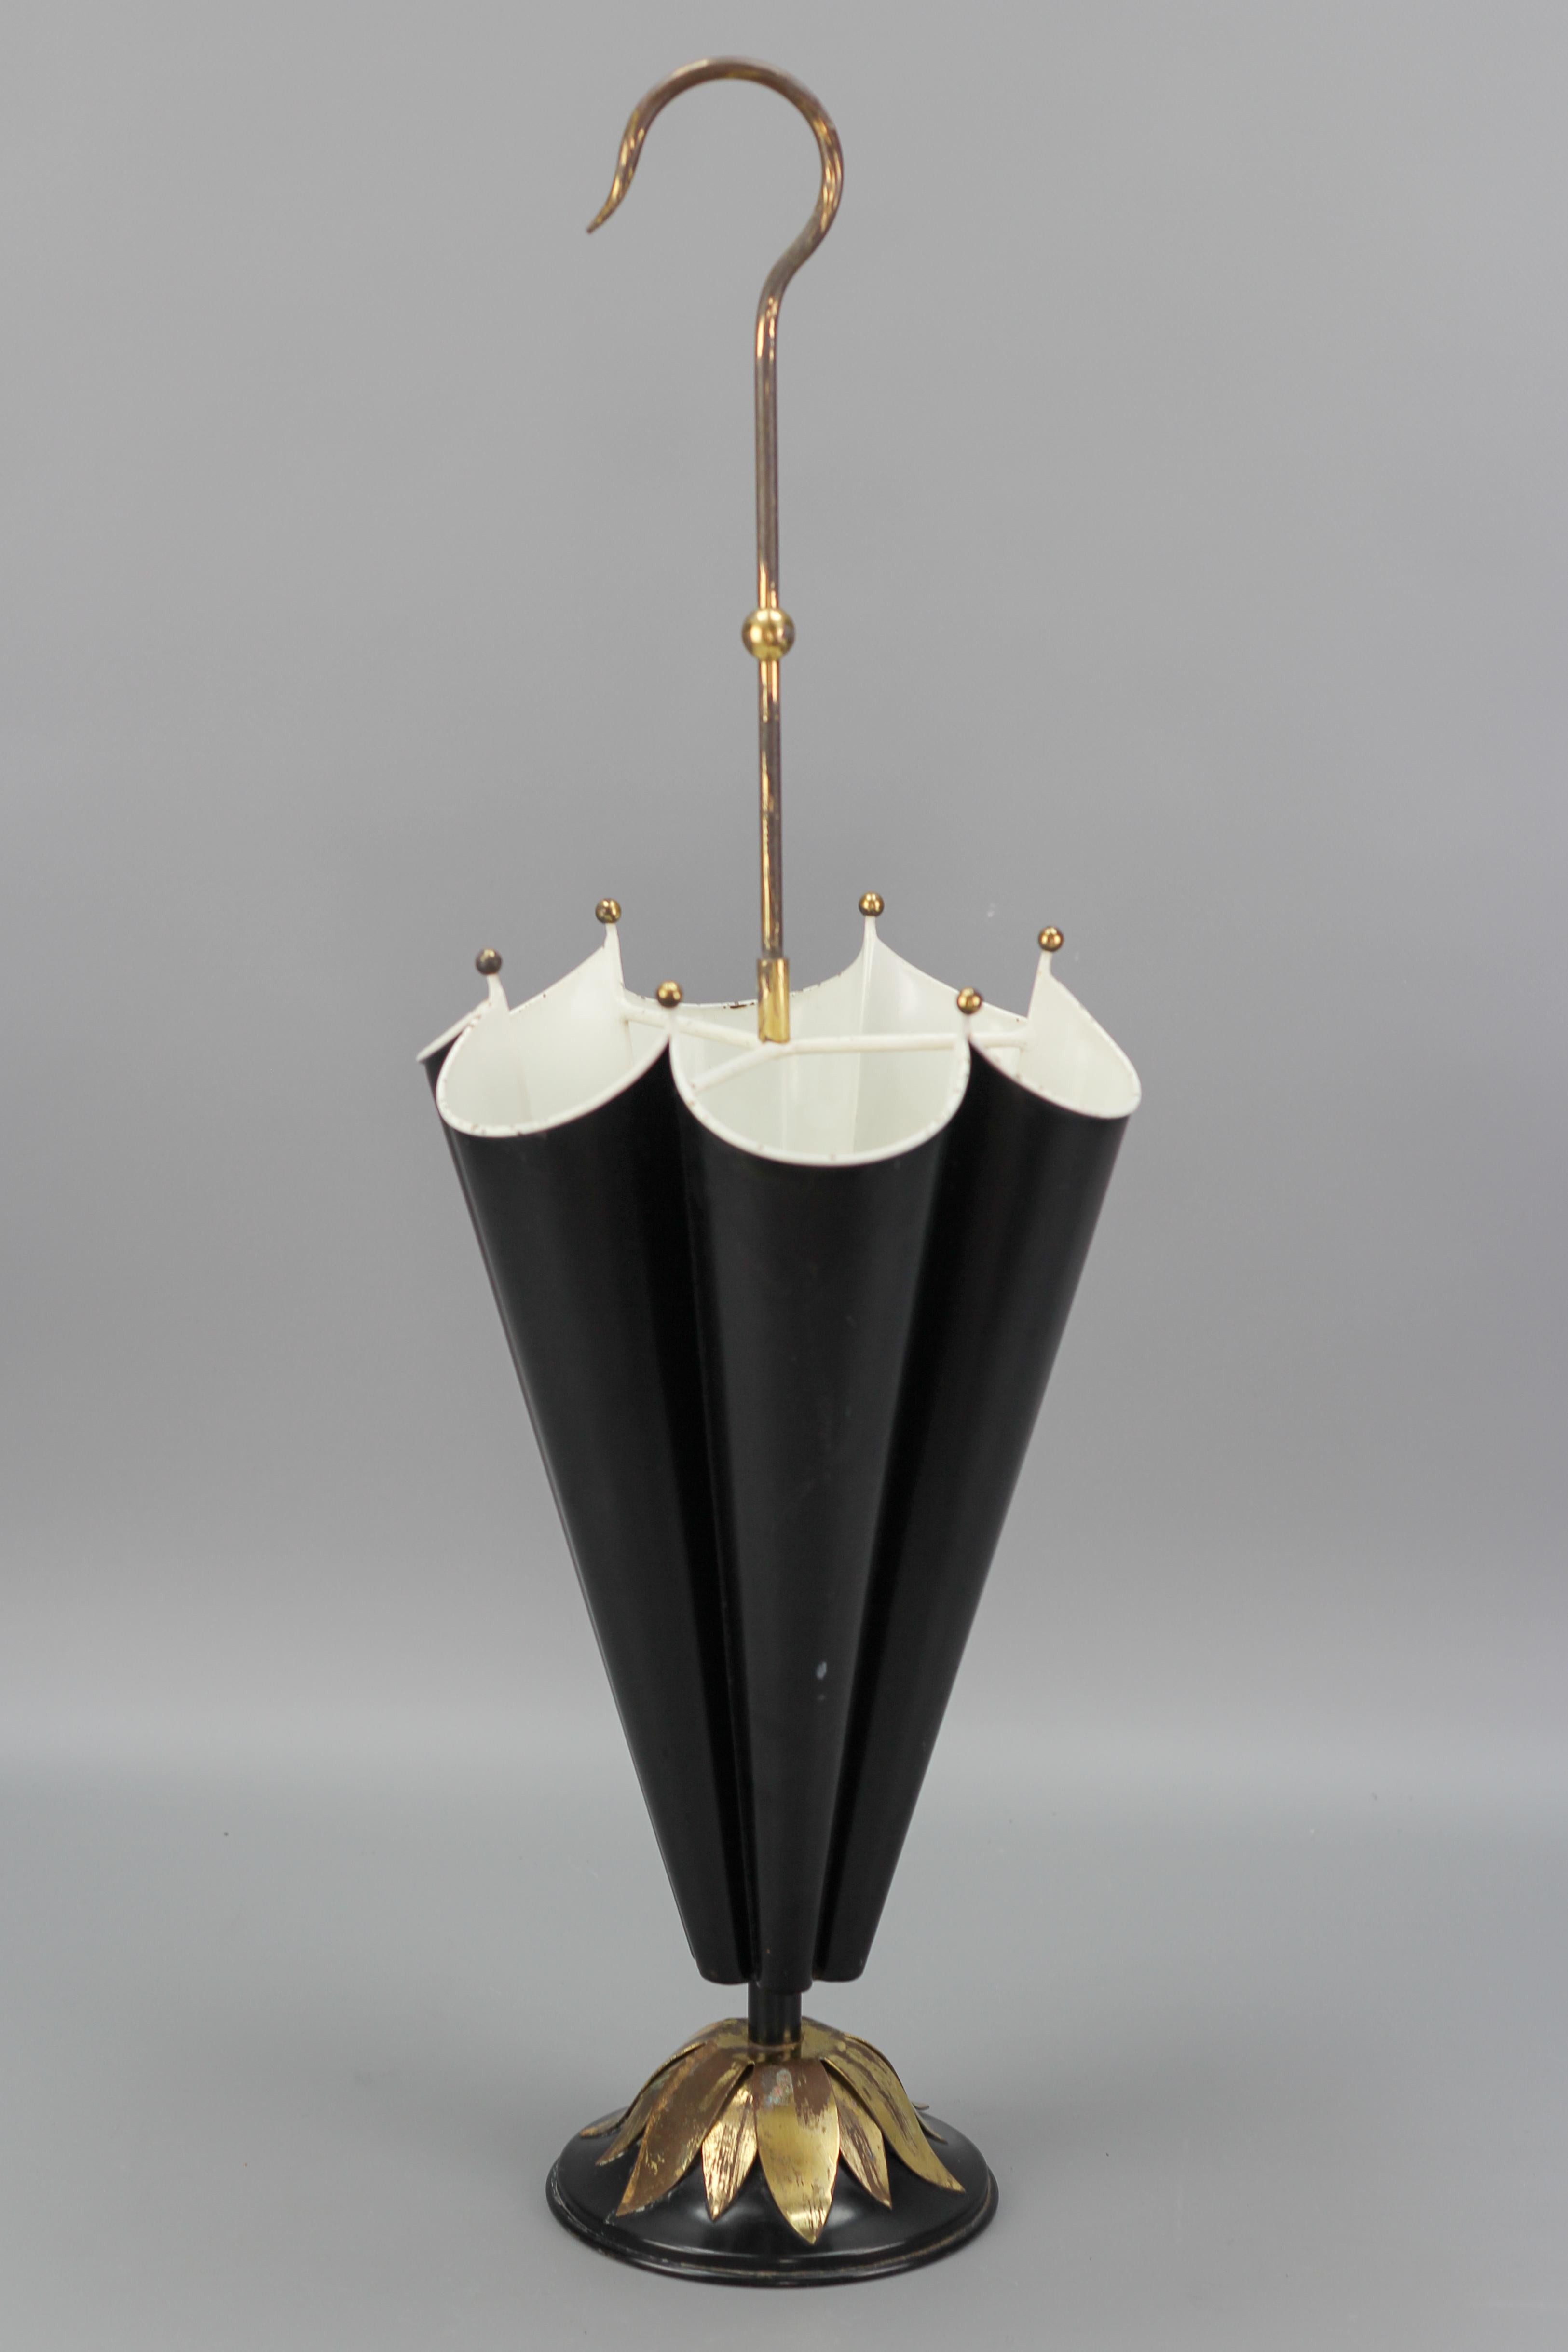 French Umbrella-Shaped Black and White Metal and Brass Umbrella Stand from the circa 1950s.
An elegant Mid-Century Modern black and white painted metal umbrella stand in the shape of an umbrella with beautiful brass details. 
Dimensions: height: